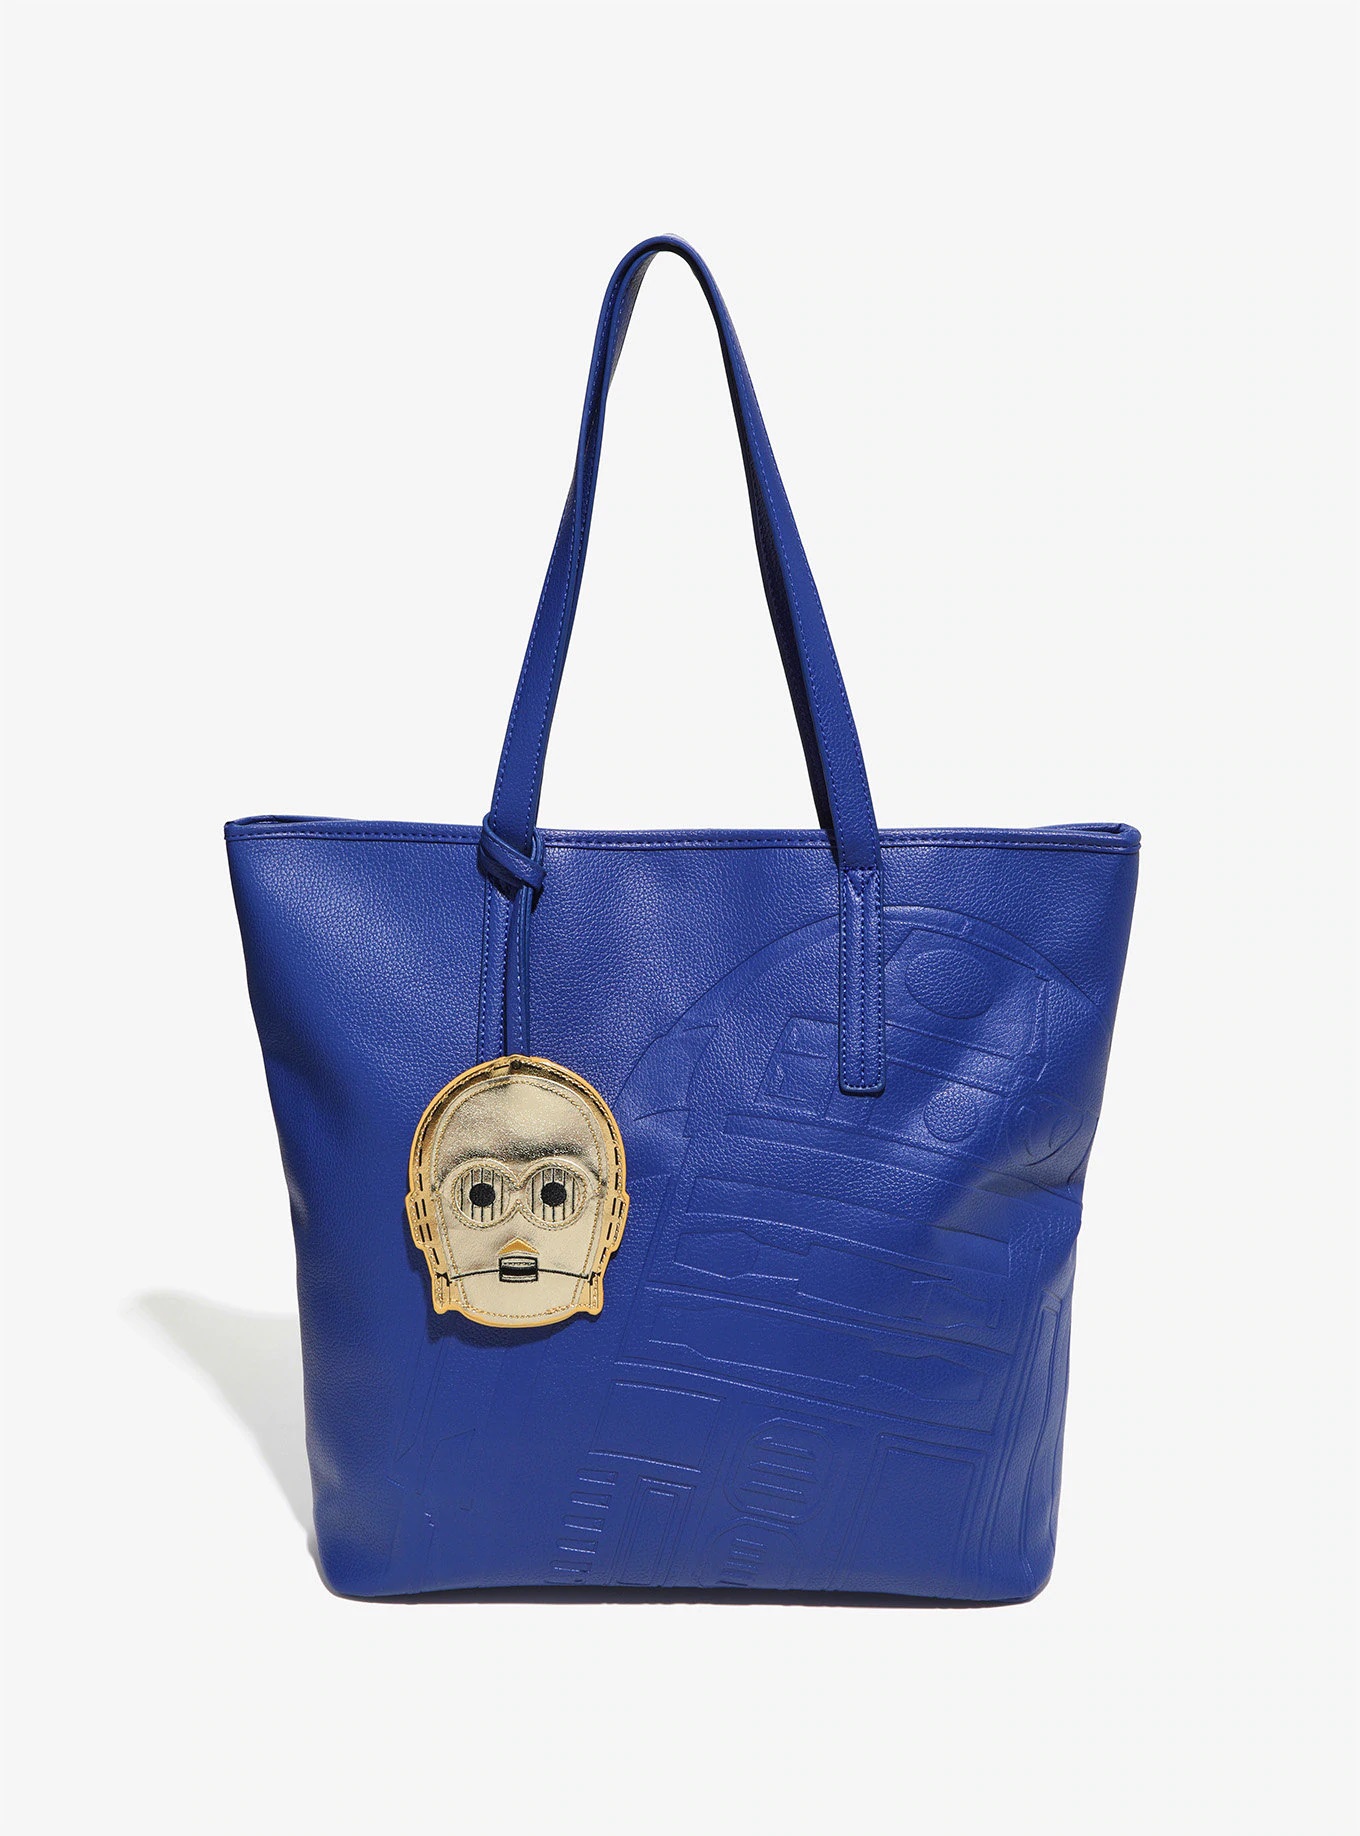 Loungefly x Star Wars R2-D2 Debossed Tote Bag on sale at Box Lunch